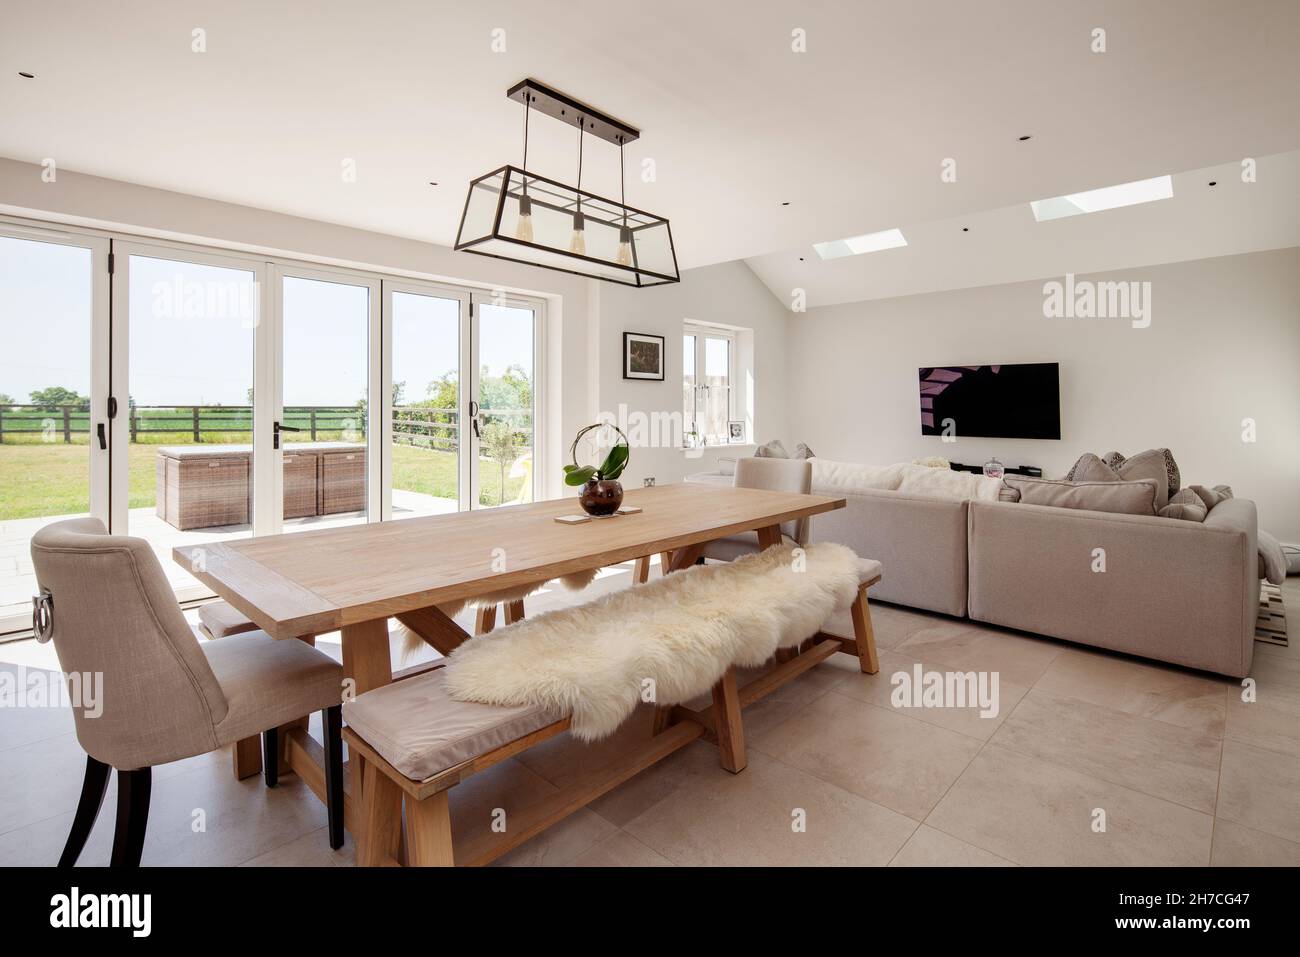 Lawshall, Suffolk, England - May 29 2020: Aspirational dining family room  with large dining table and seating area in front of tv with bifold doors  Stock Photo - Alamy